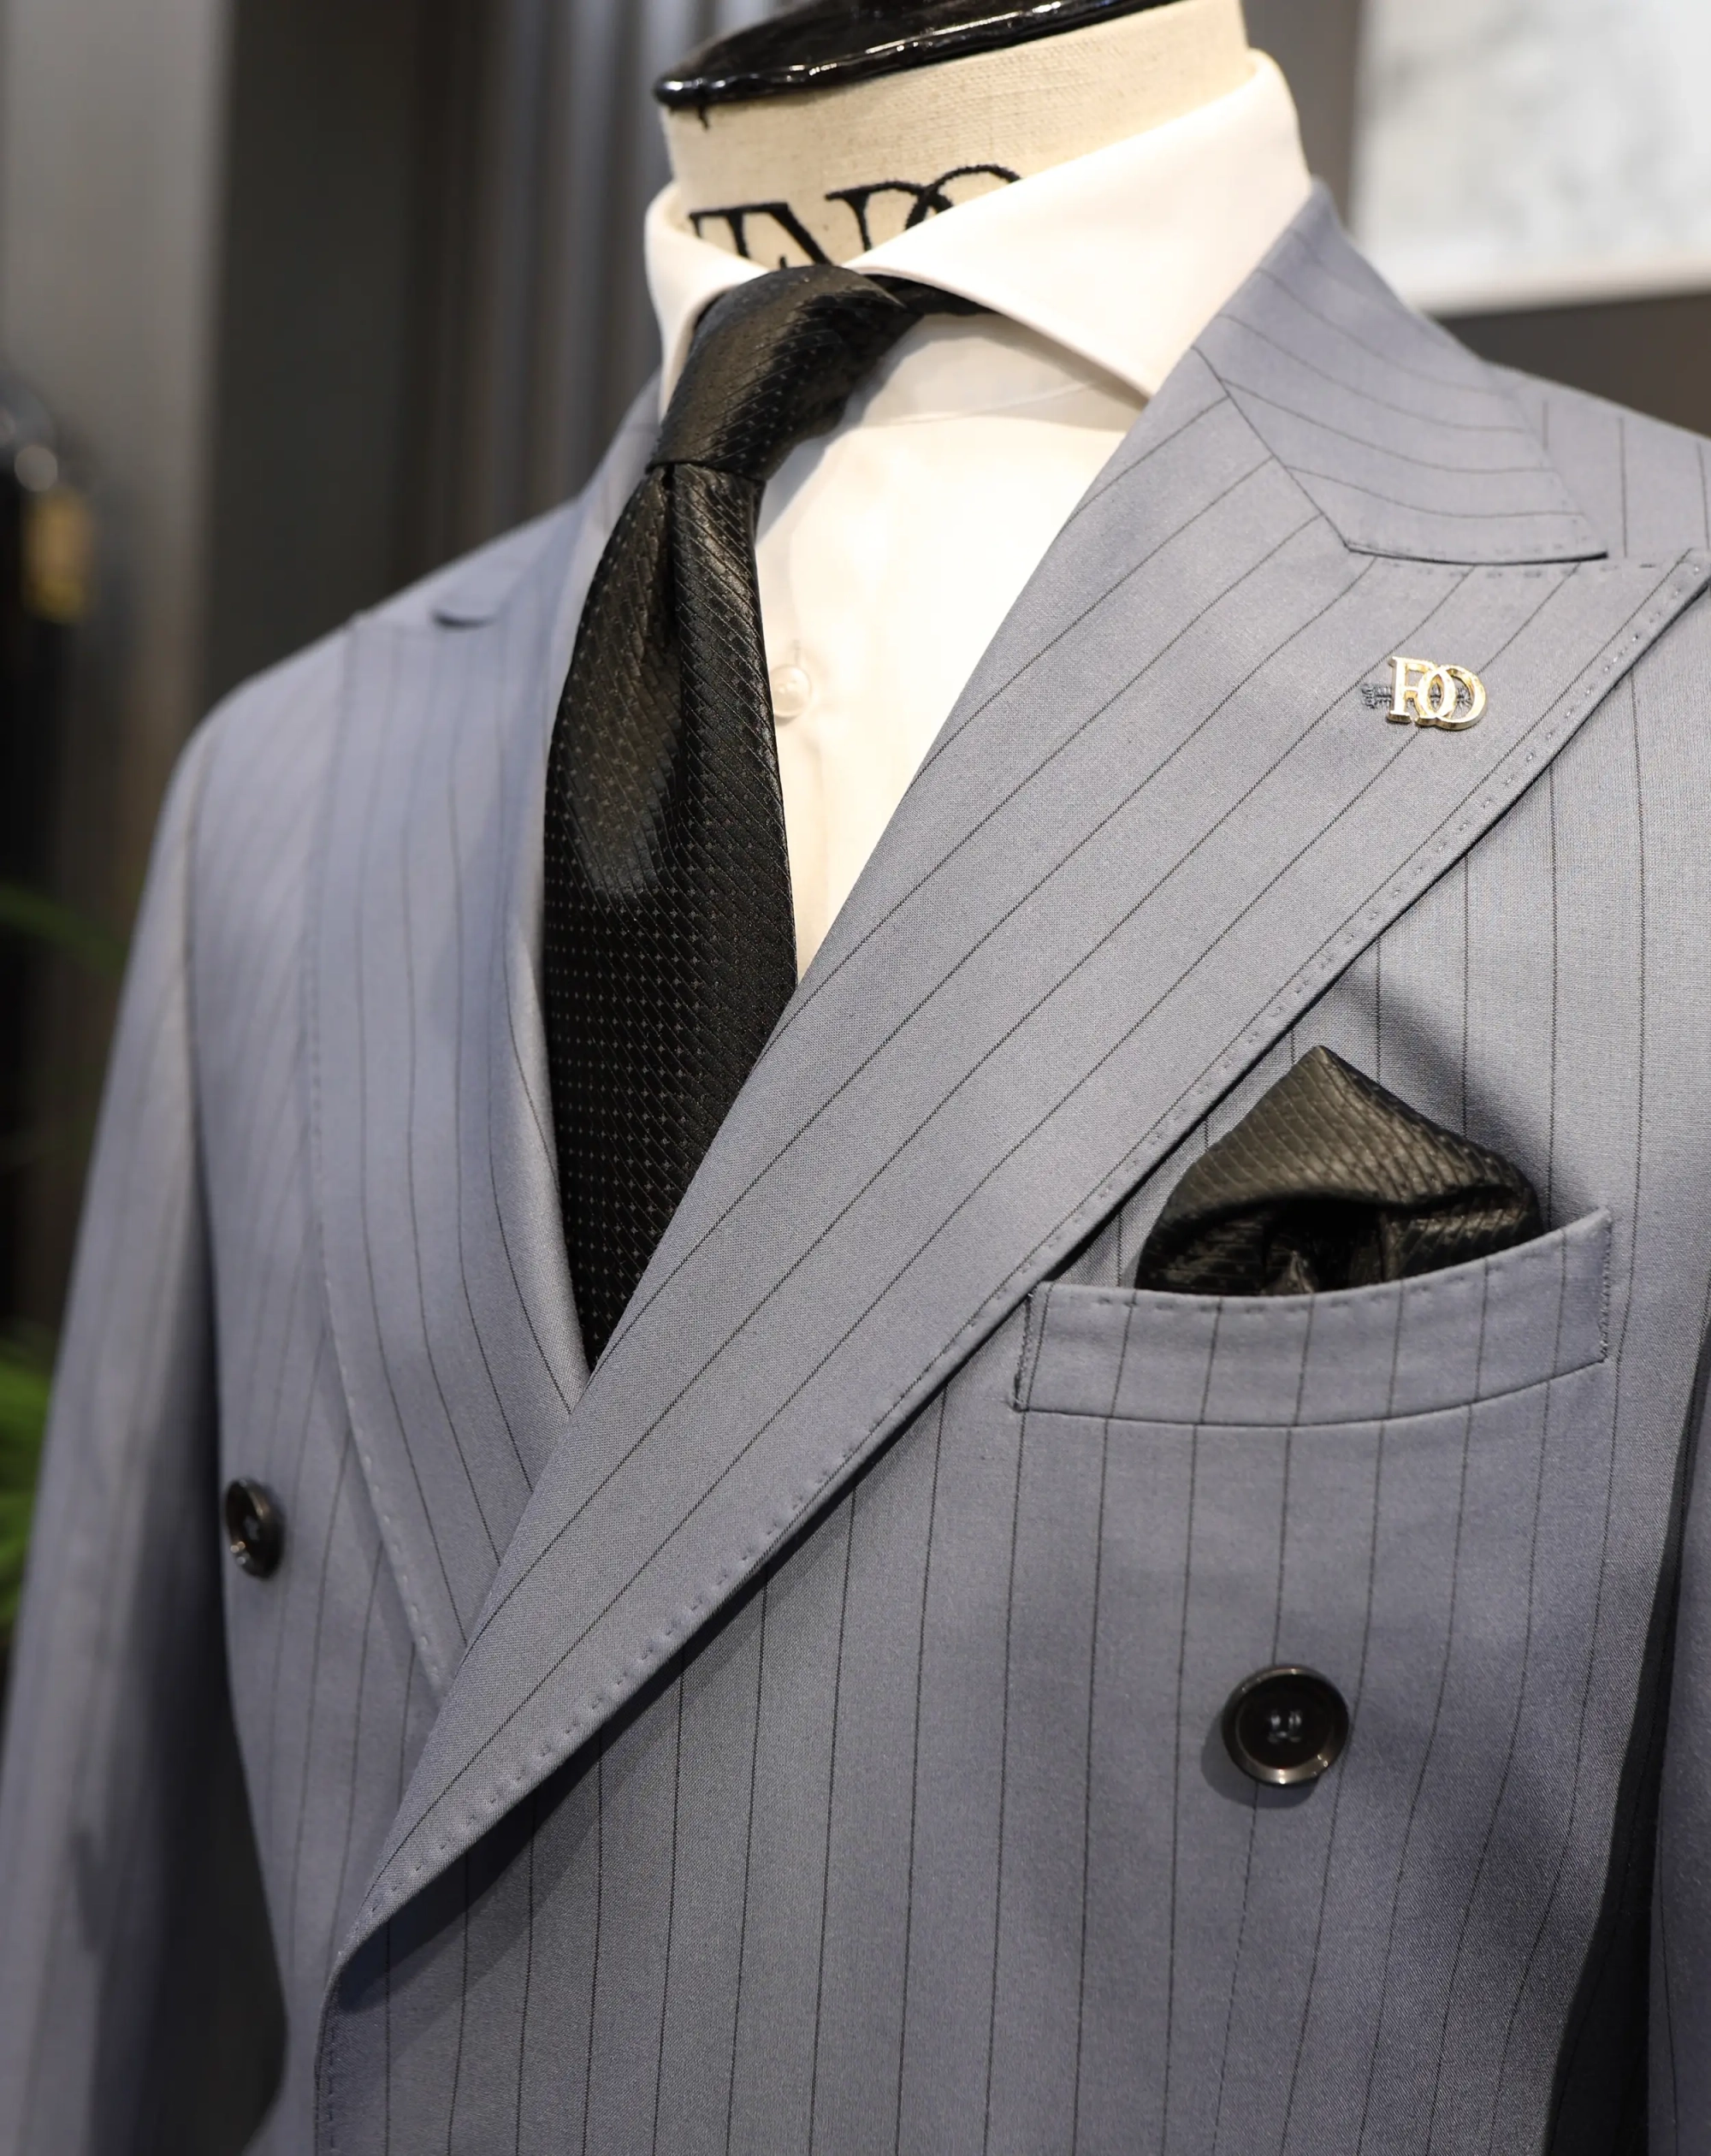 Bischofszell sky blue double breasted suit with black stripes